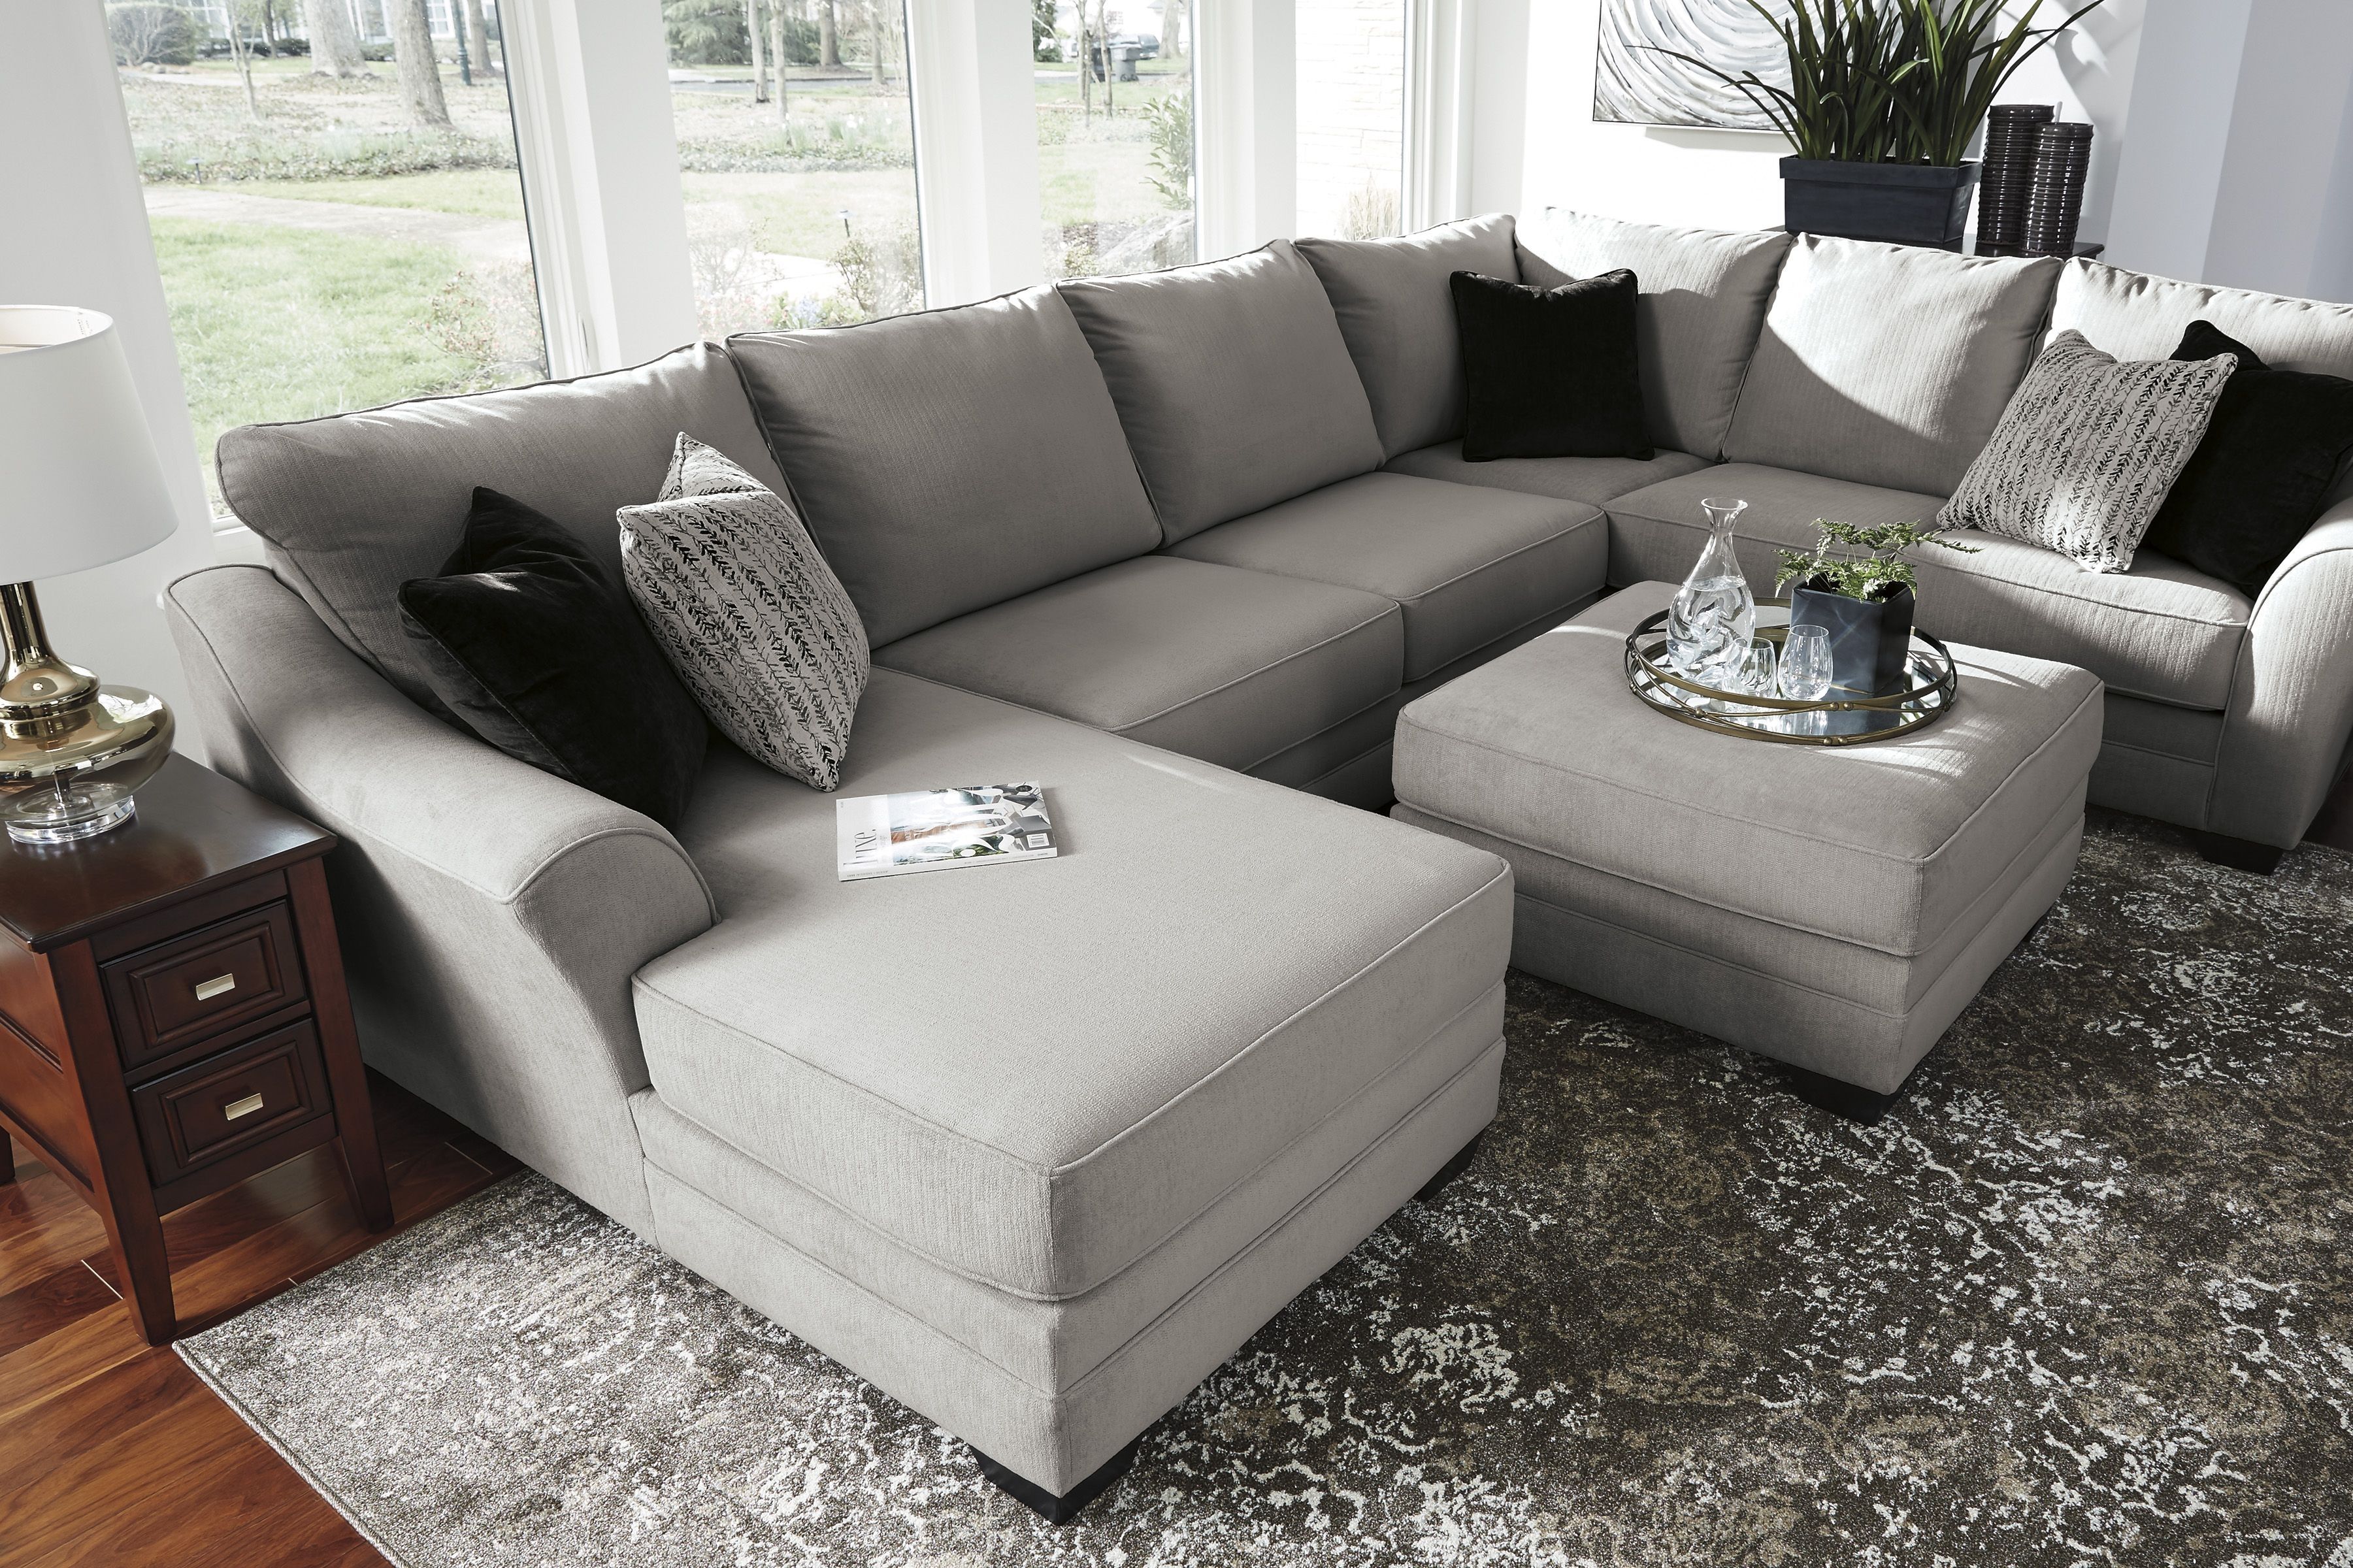 Palempor 3 Piece Laf Sectional In 2018 | Home Is Where The Heart Is Regarding Norfolk Chocolate 6 Piece Sectionals With Laf Chaise (View 30 of 30)